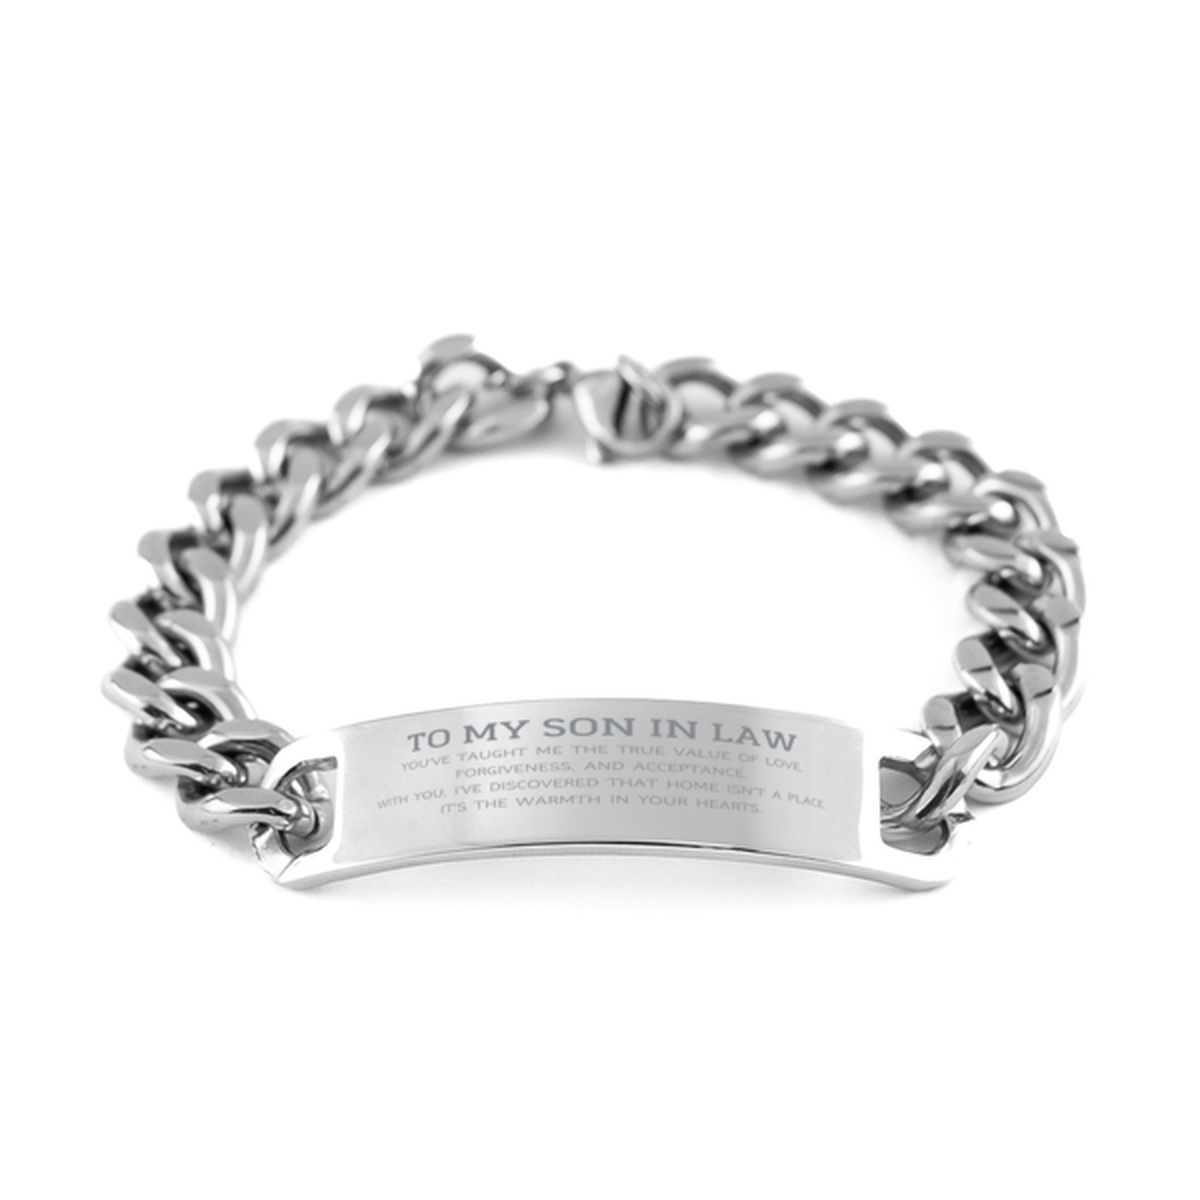 To My Son In Law Gifts, You've taught me the true value of love, Thank You Gifts For Son In Law, Birthday Cuban Chain Stainless Steel Bracelet For Son In Law